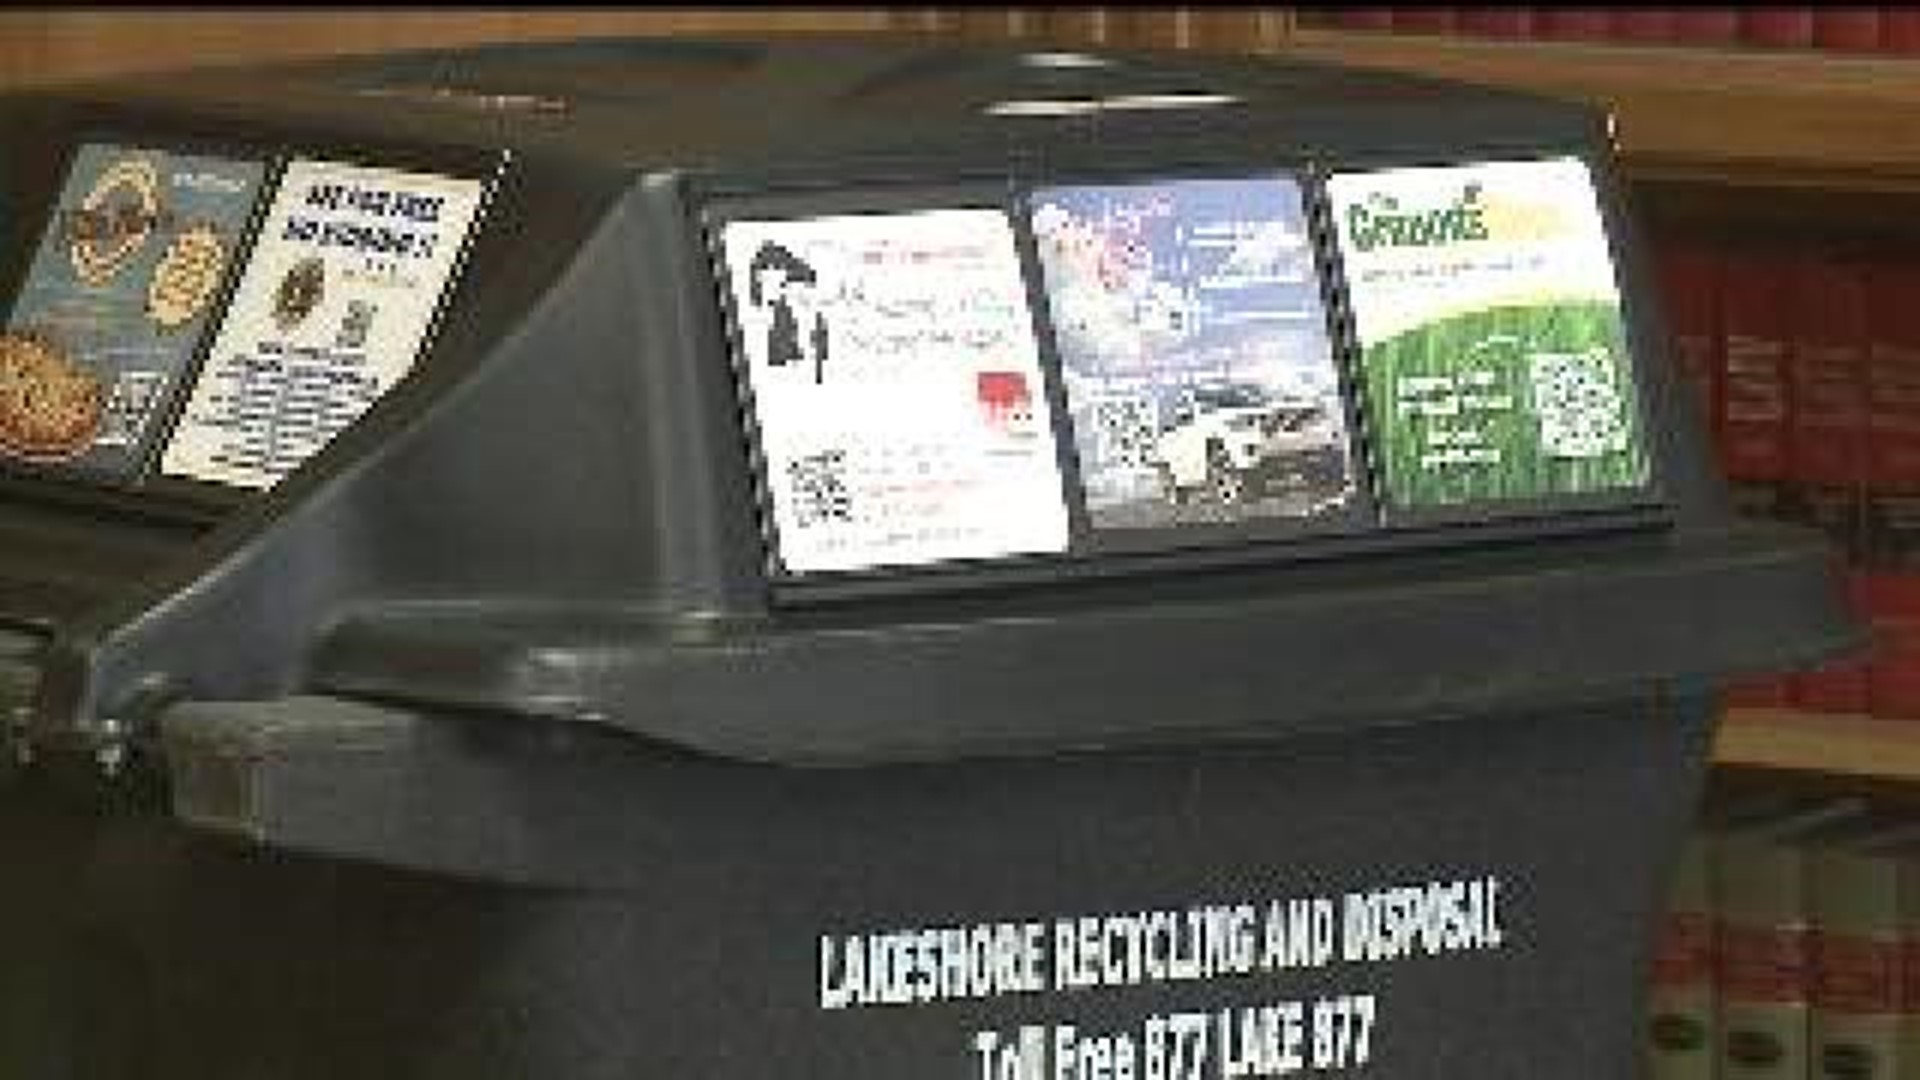 Ads will go on Moline garbage cart lids